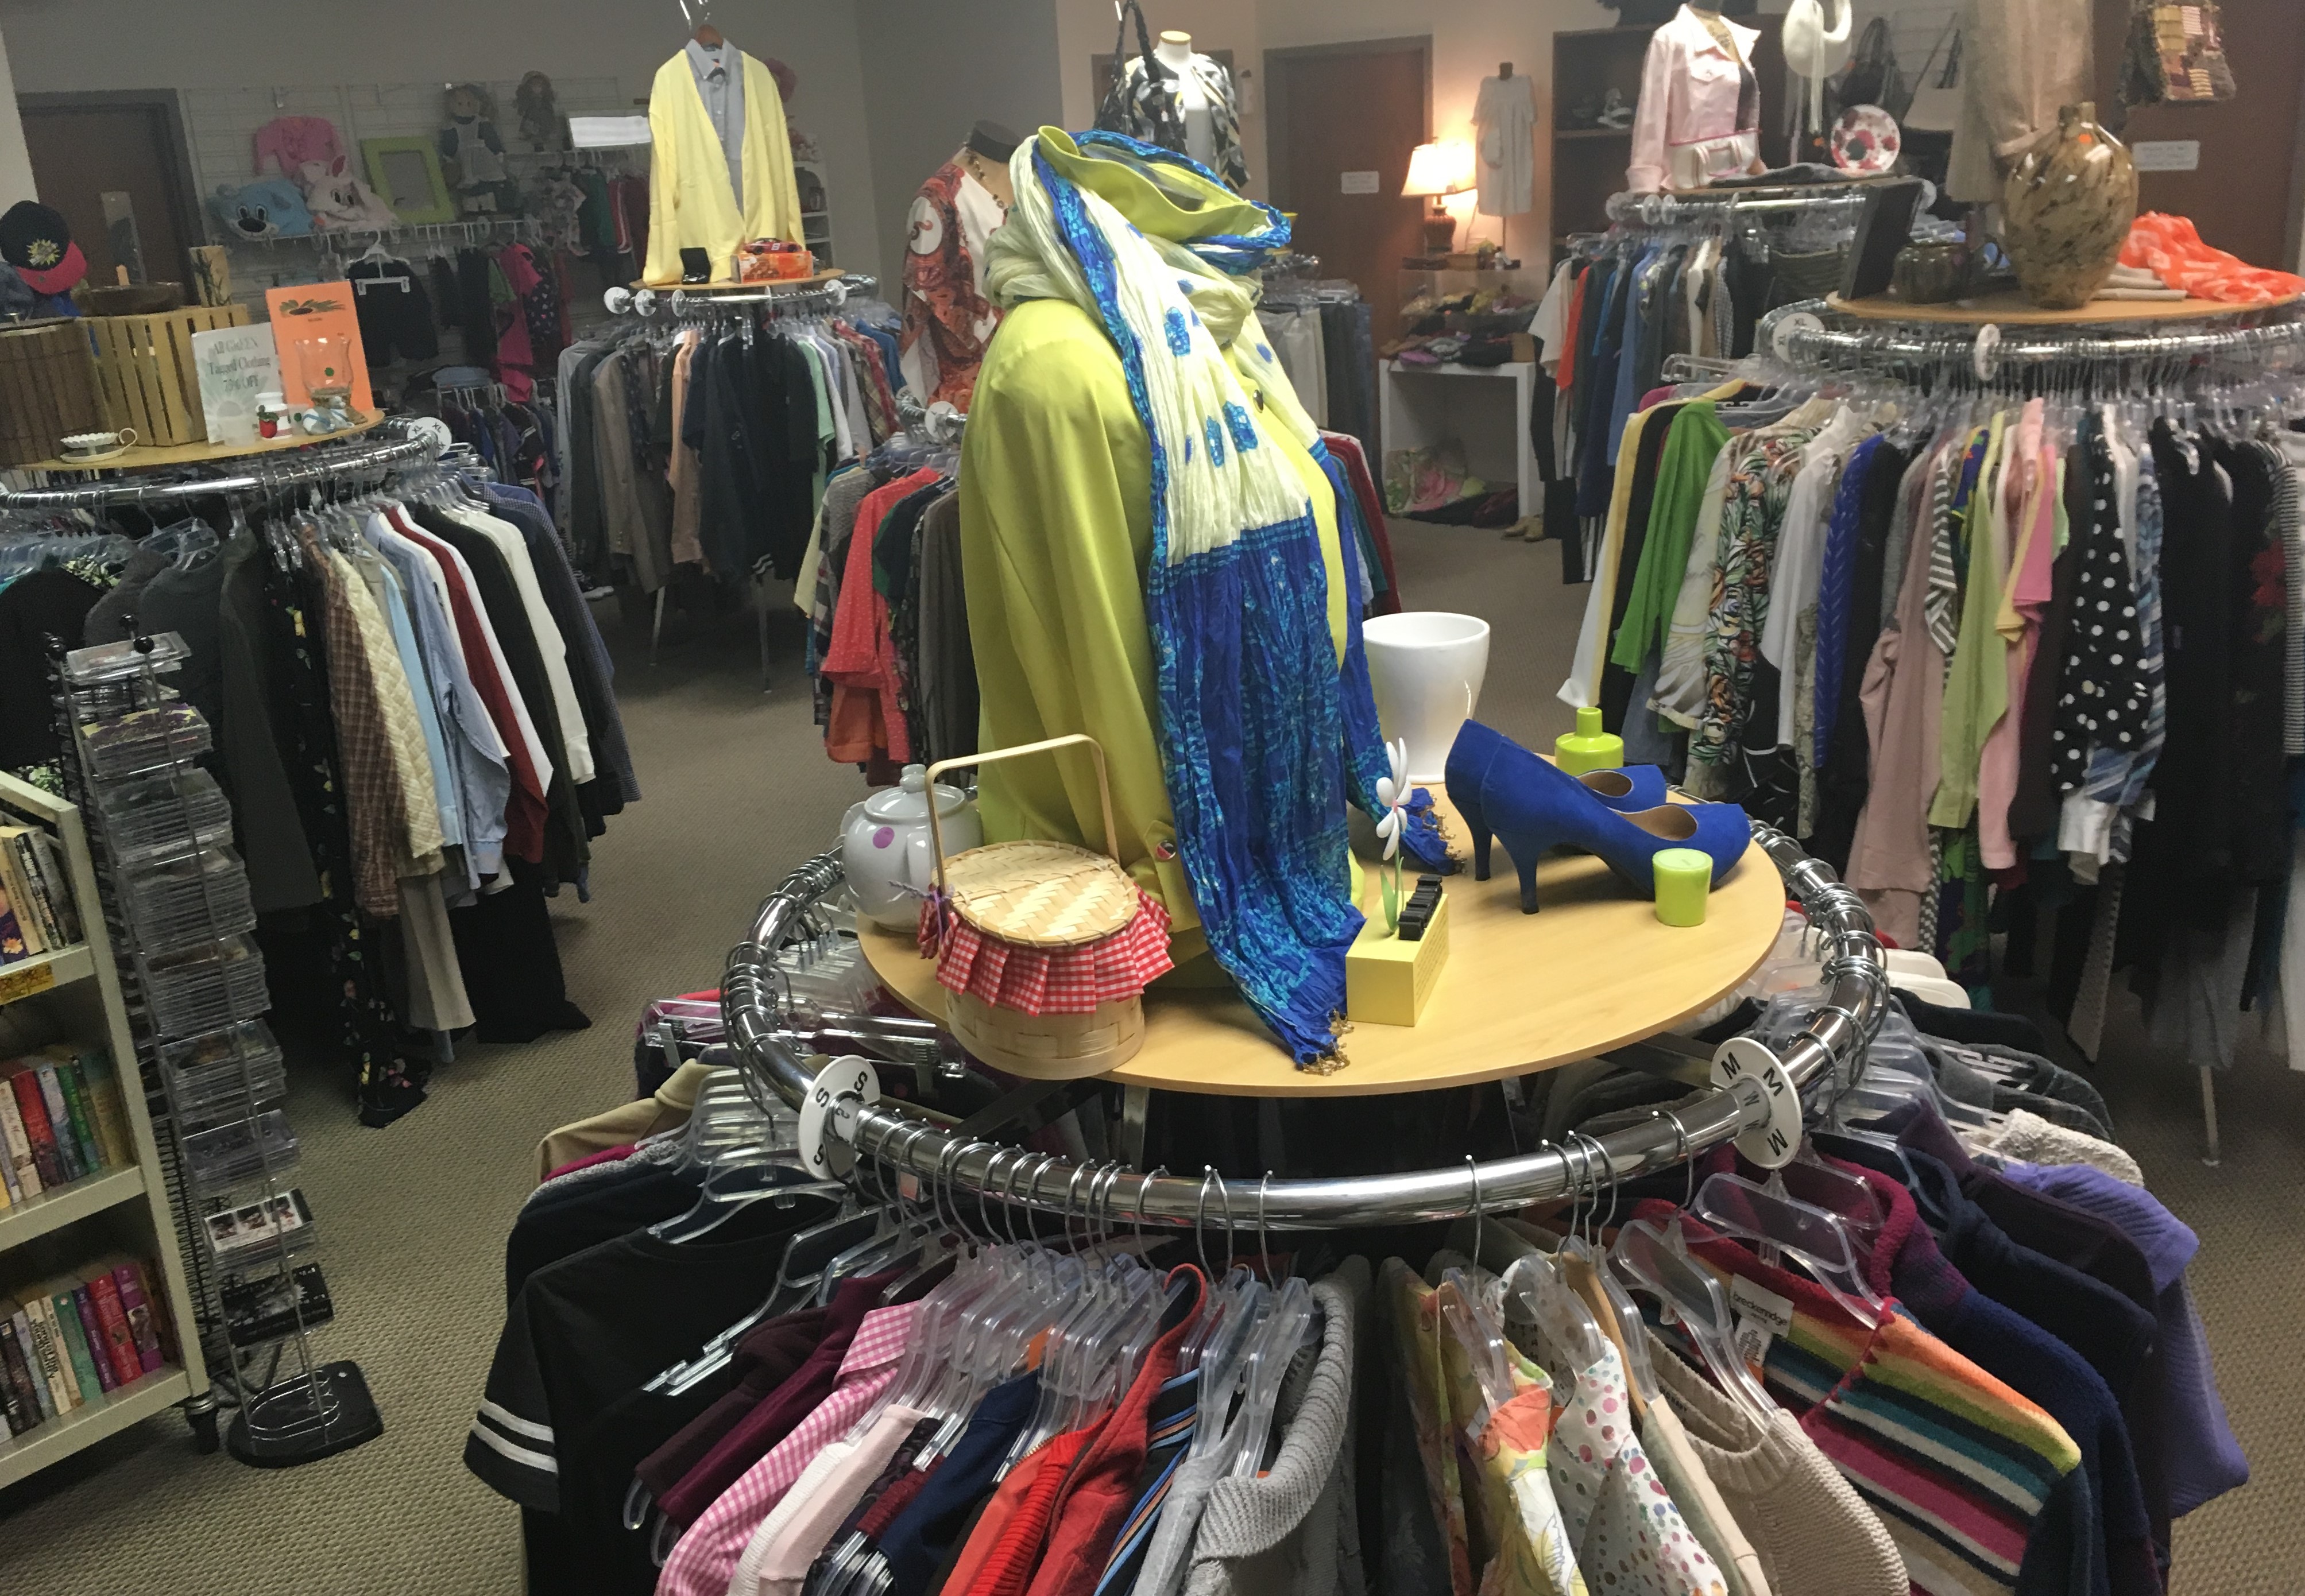 Carle Auxiliary Resale Boutique Celebrates its 10th Anniversary